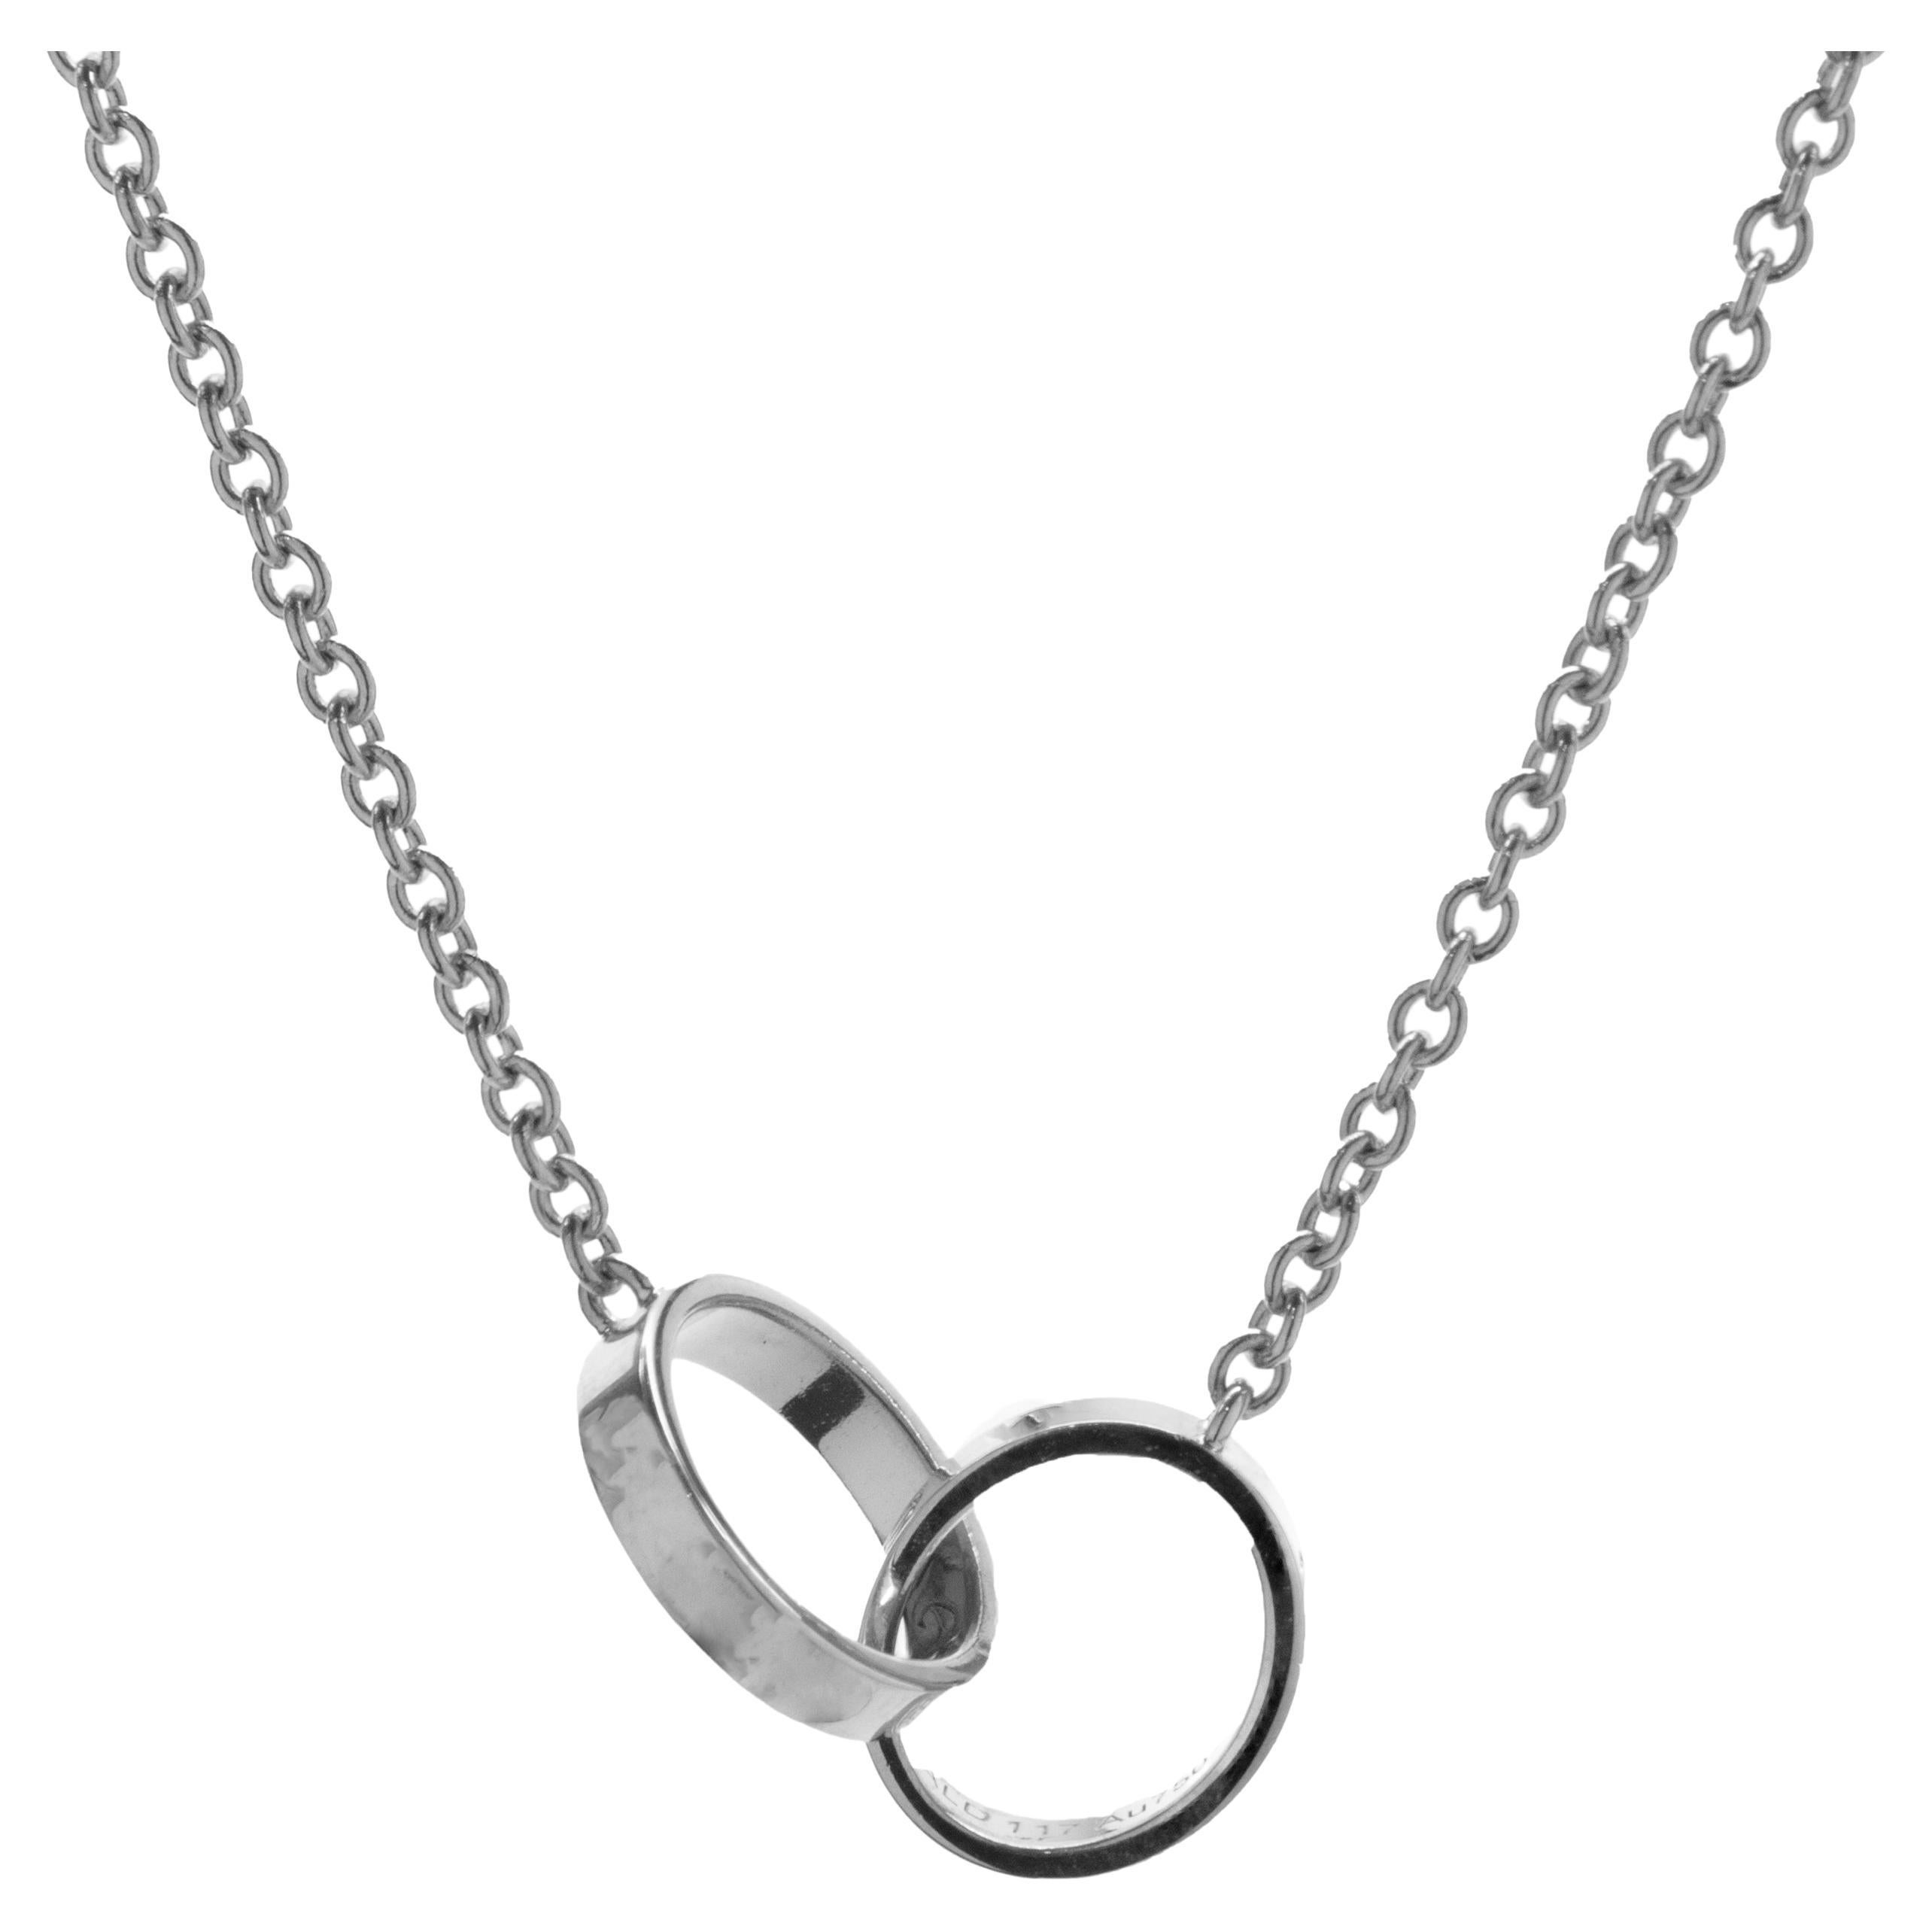 Tiffany & Co. Sterling Silver Interlocking Circle Necklace